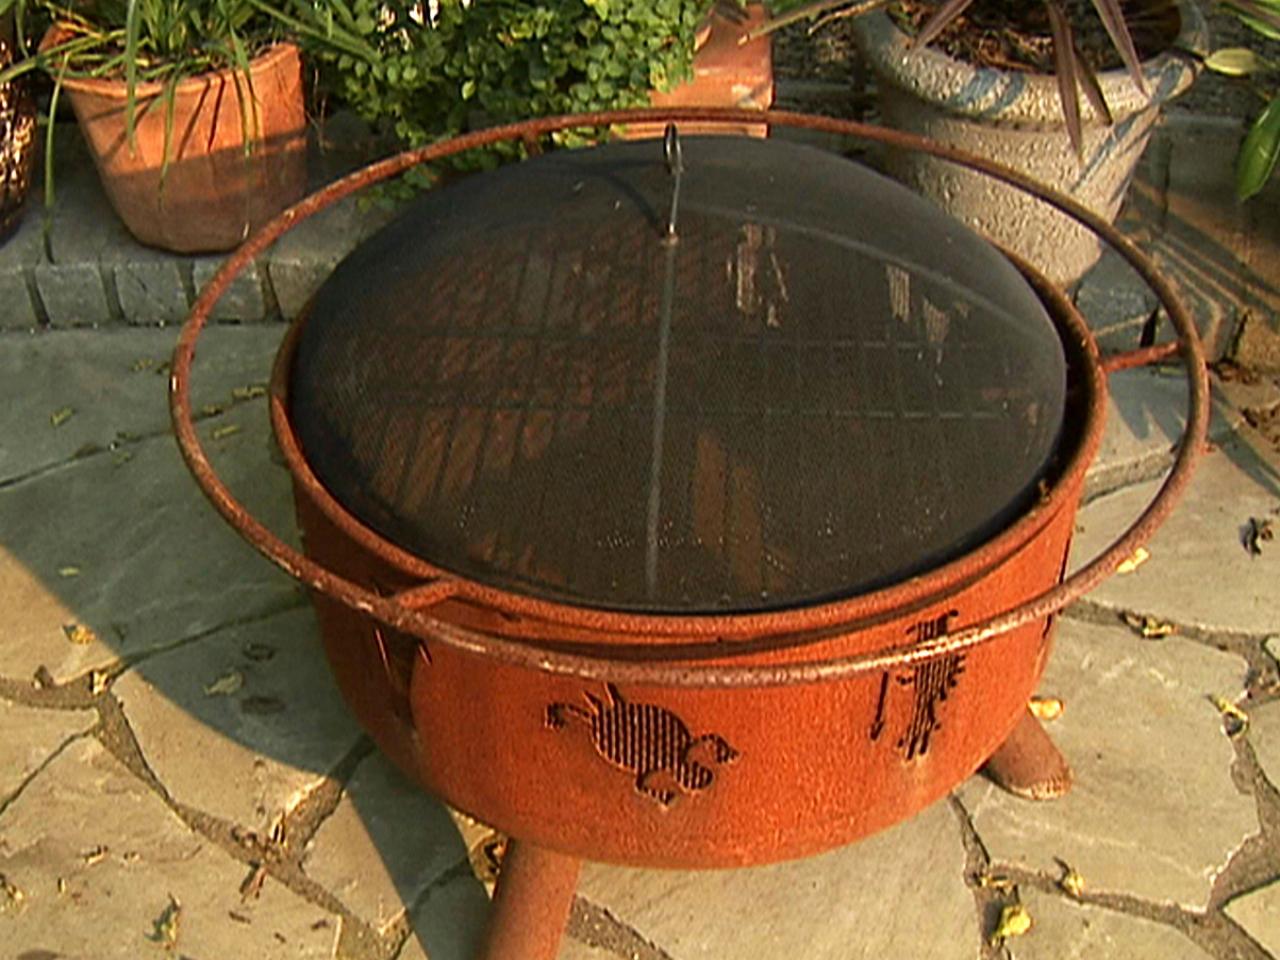 Outdoor Fire Pits And Pit Safety, 6 Foot Fire Pit Ring